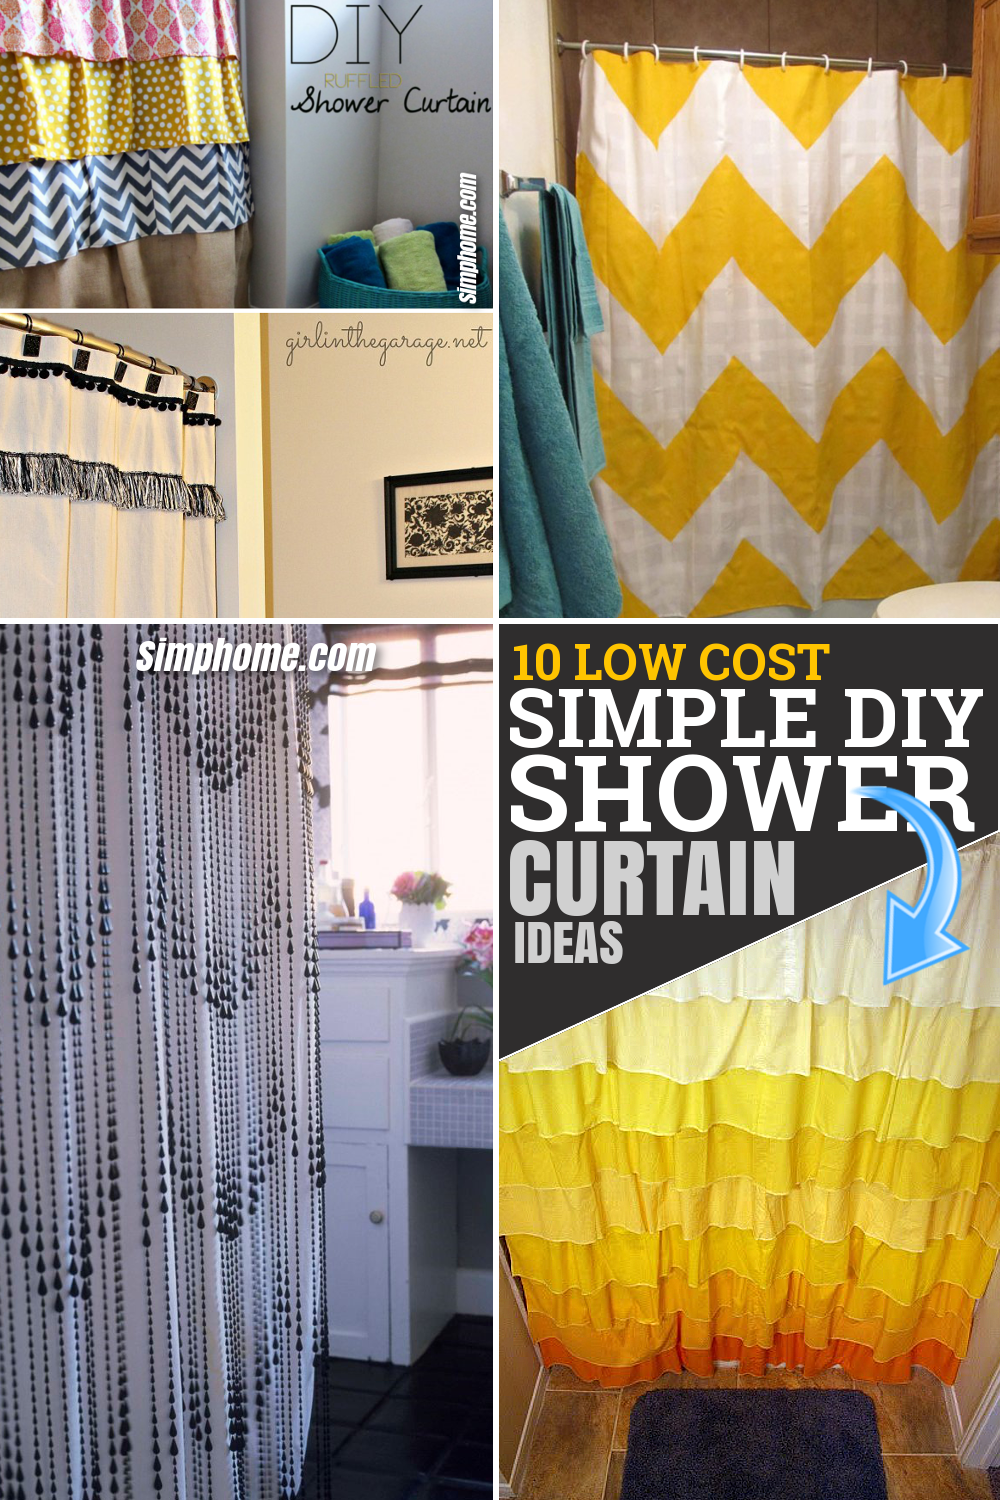 10 Low Cost and Simple DIY Shower Curtain by SIMPHOME.COM Ideas Featured pintretest long